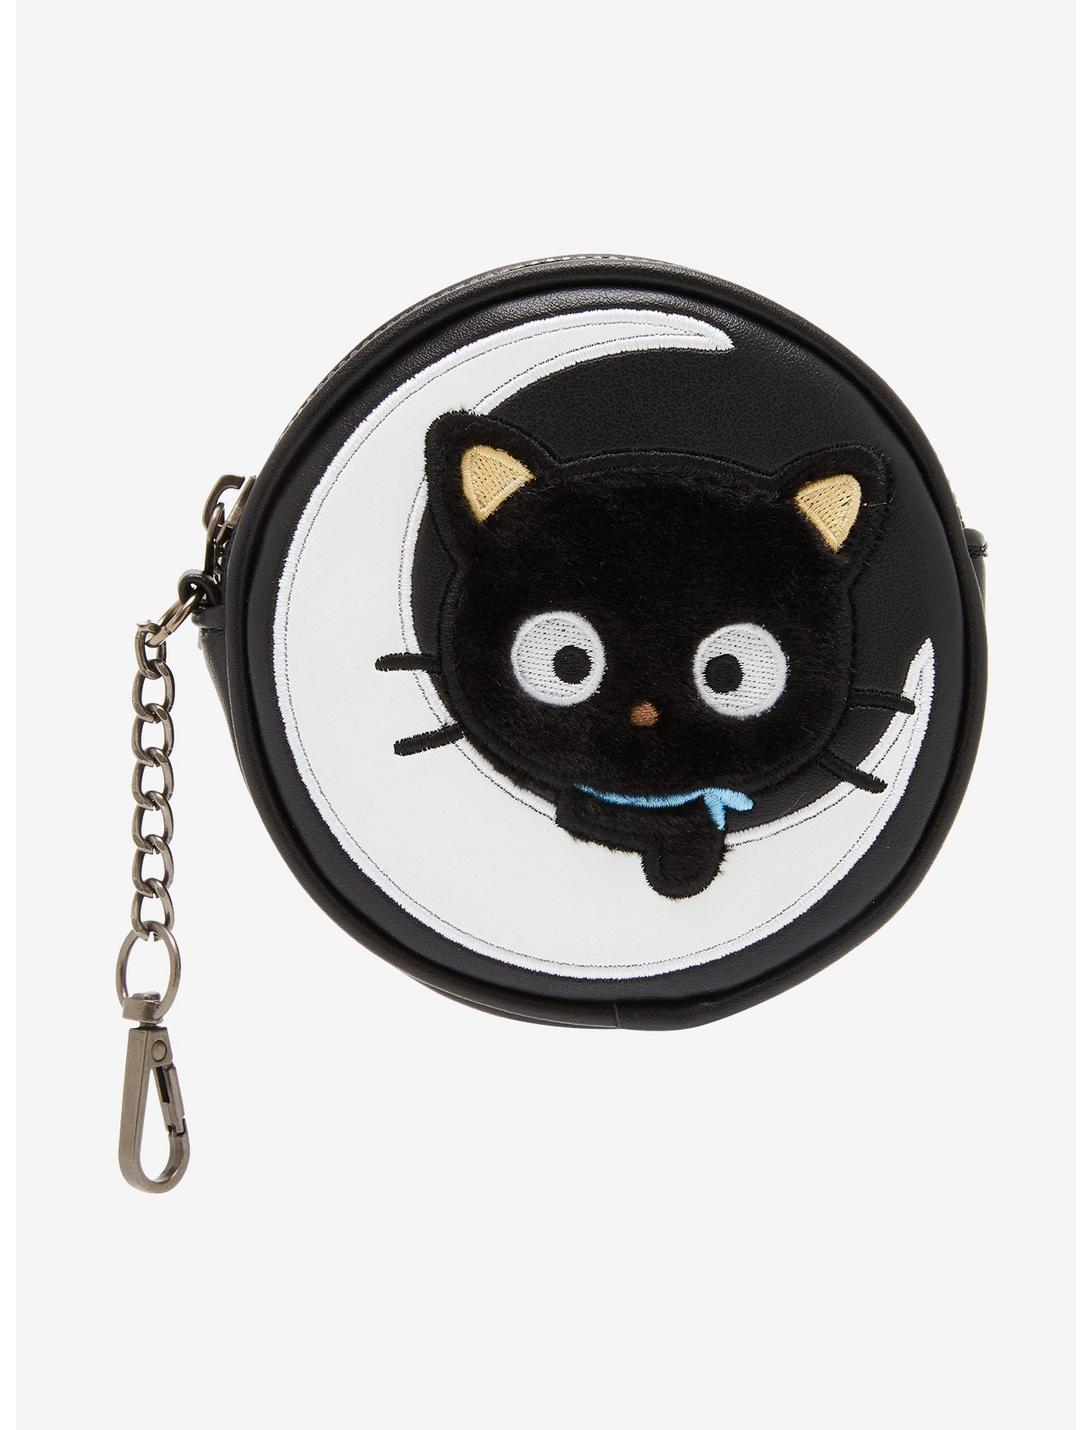 Her Universe Chococat Celestial Glow-In-The-Dark Coin Purse Hot Topic